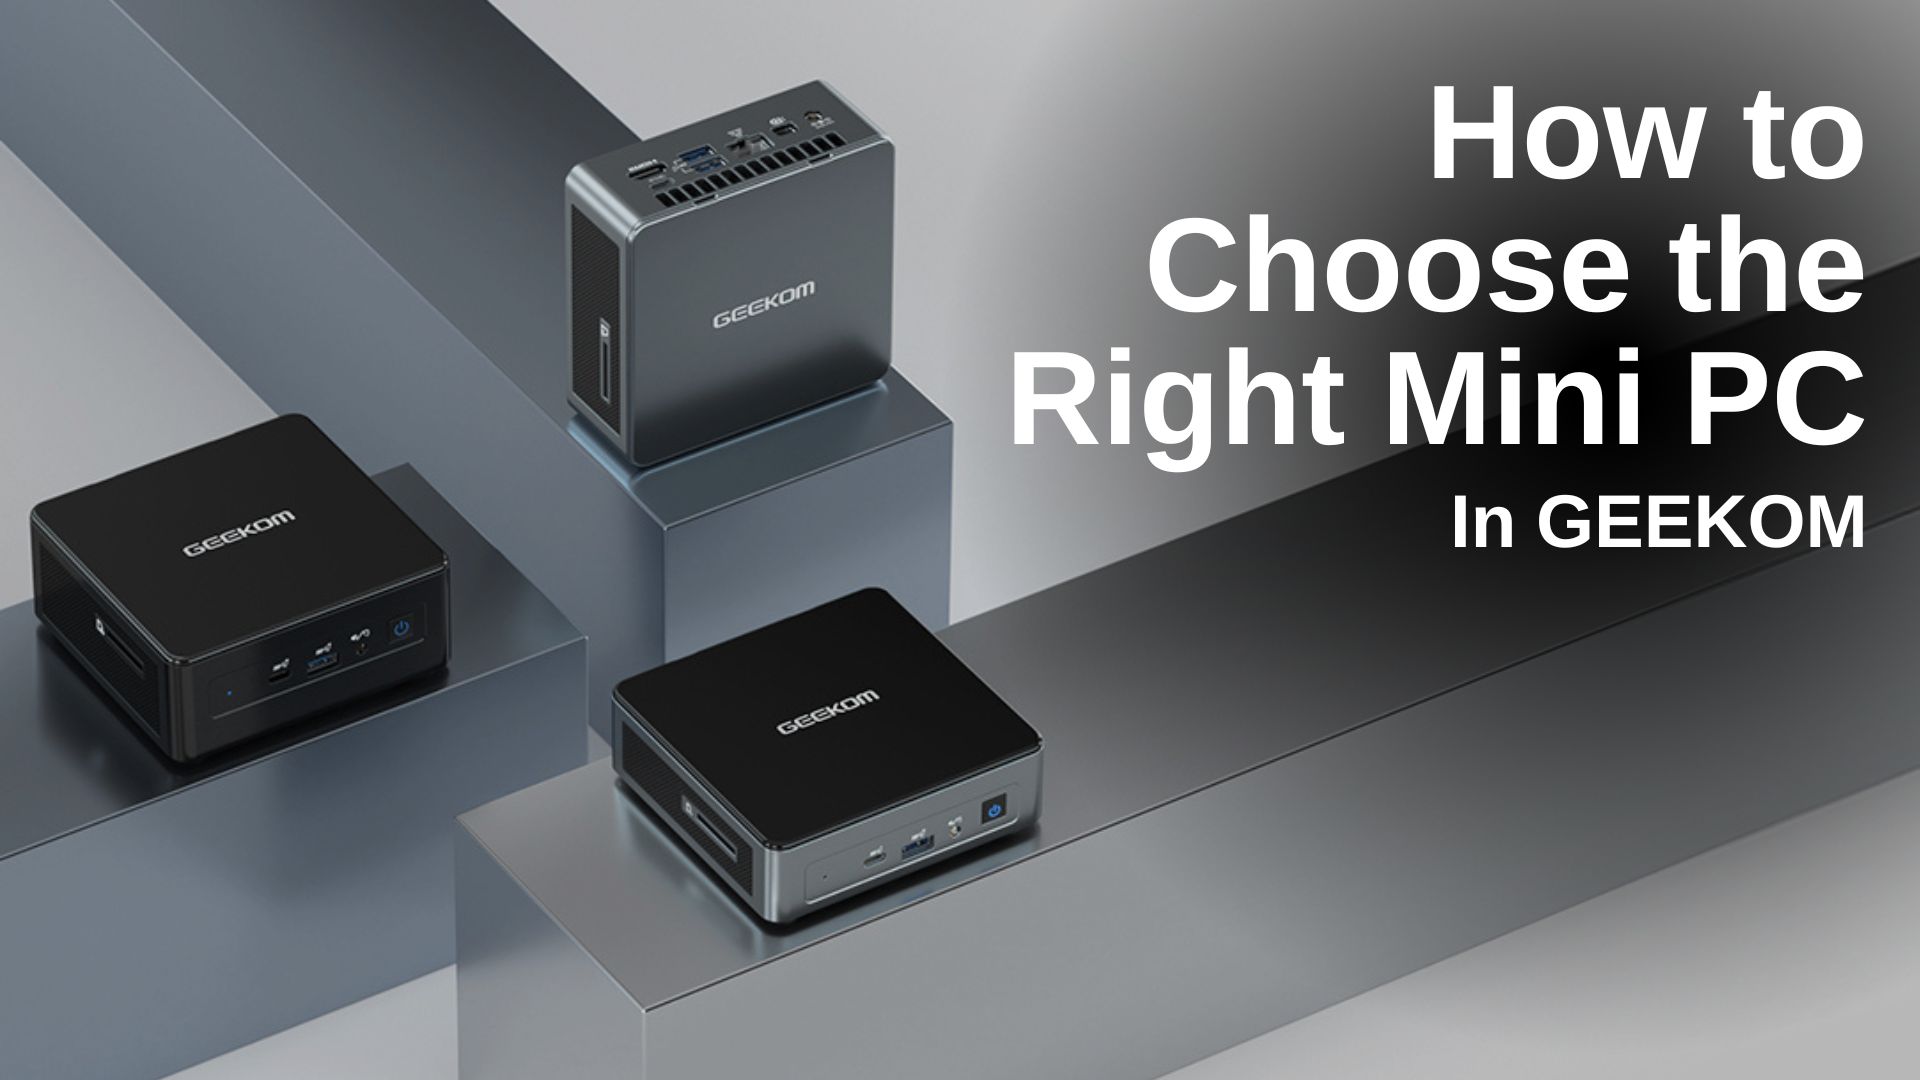 How to Choose the Right Mini PC